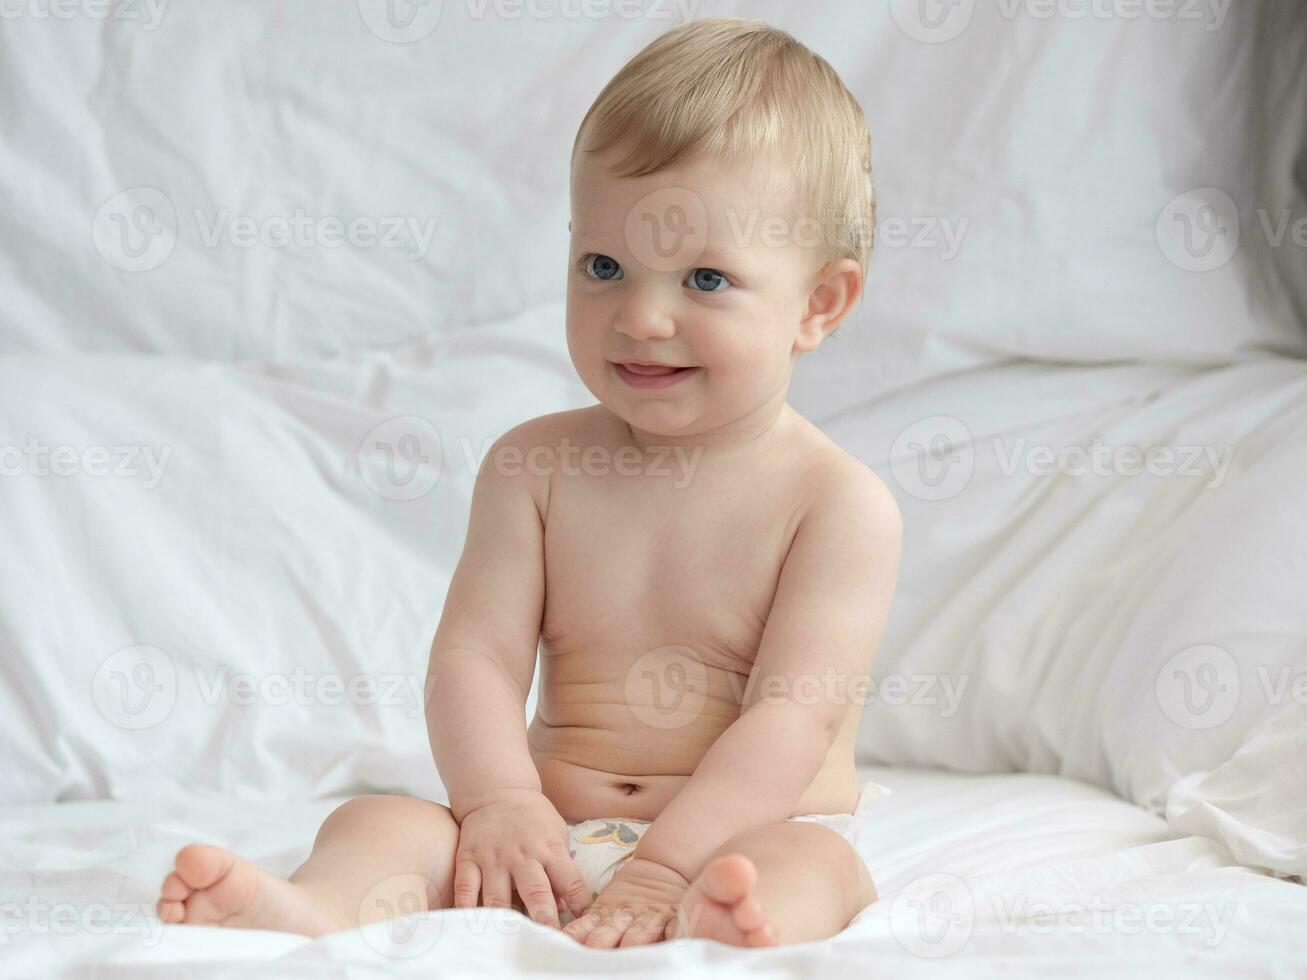 Cute Baby Sitting and Smiling on The Bed photo